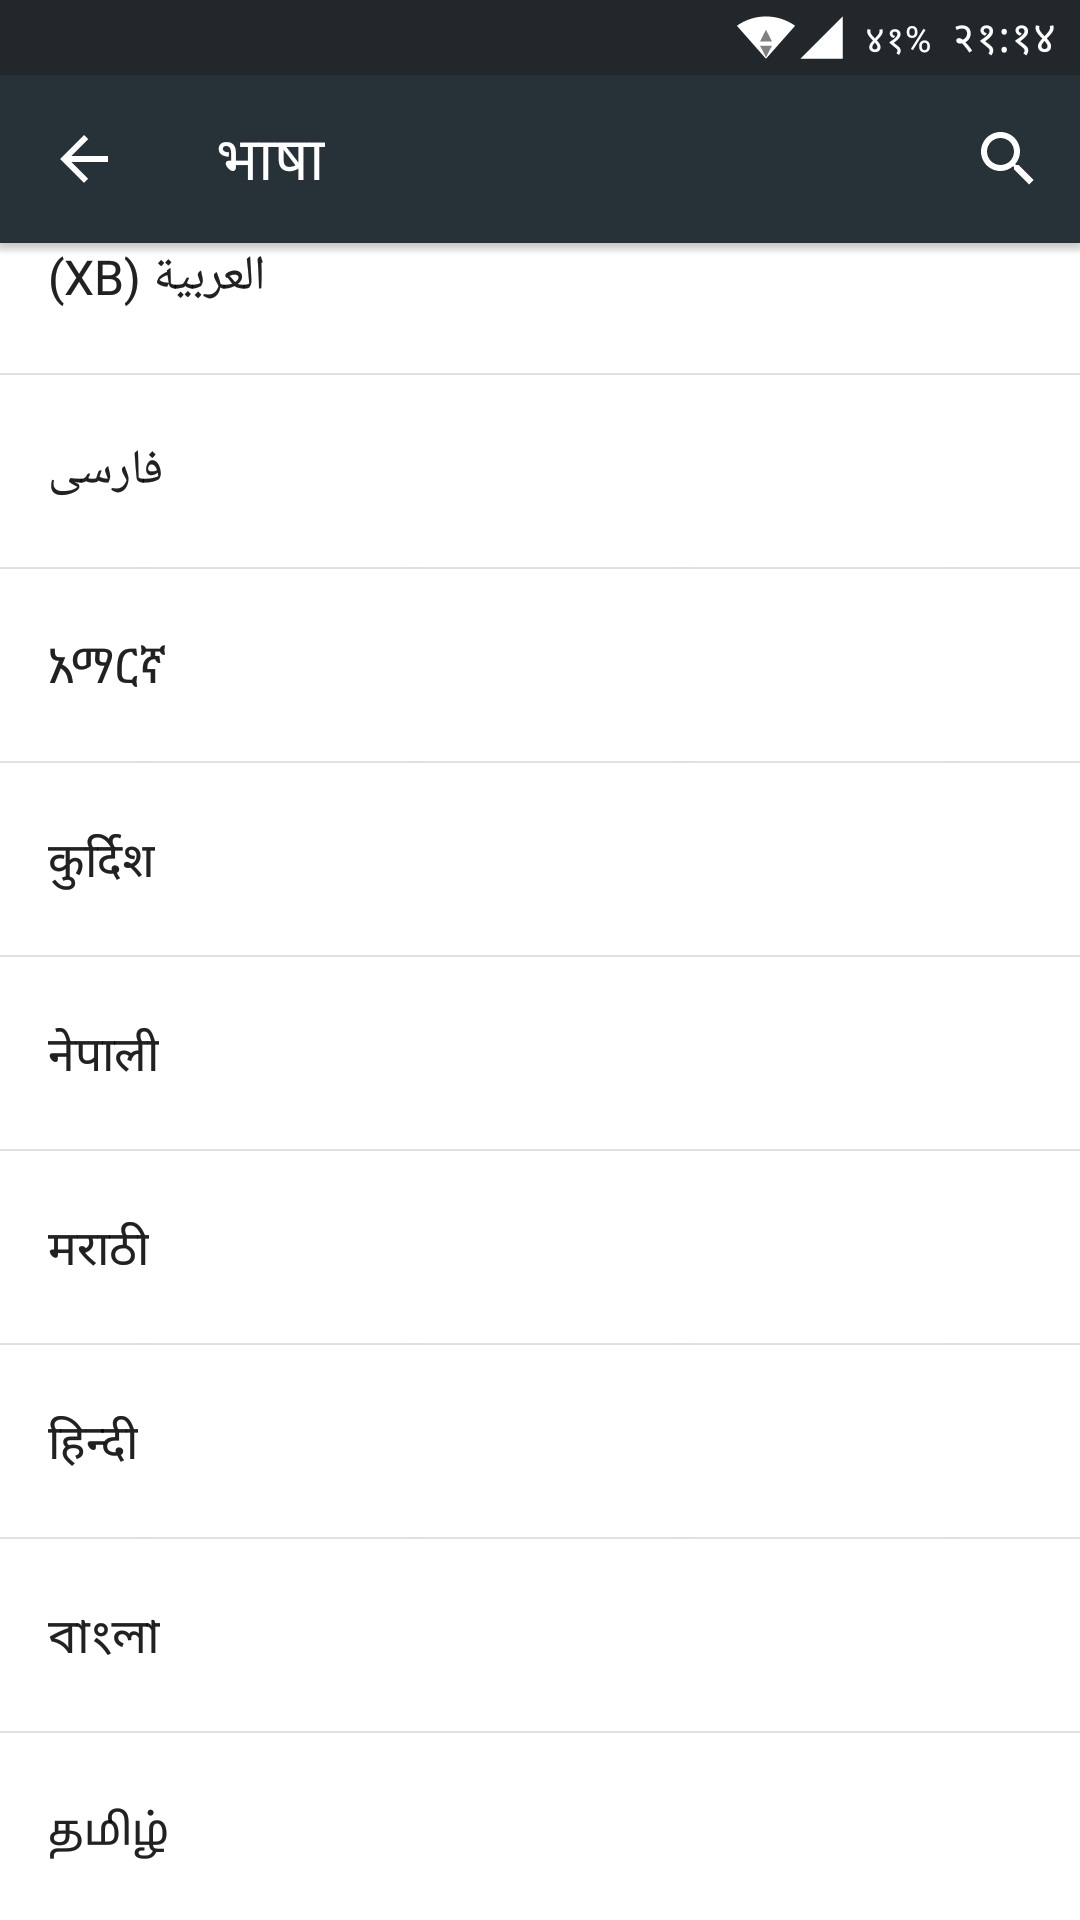 Nepali language in Android Devices